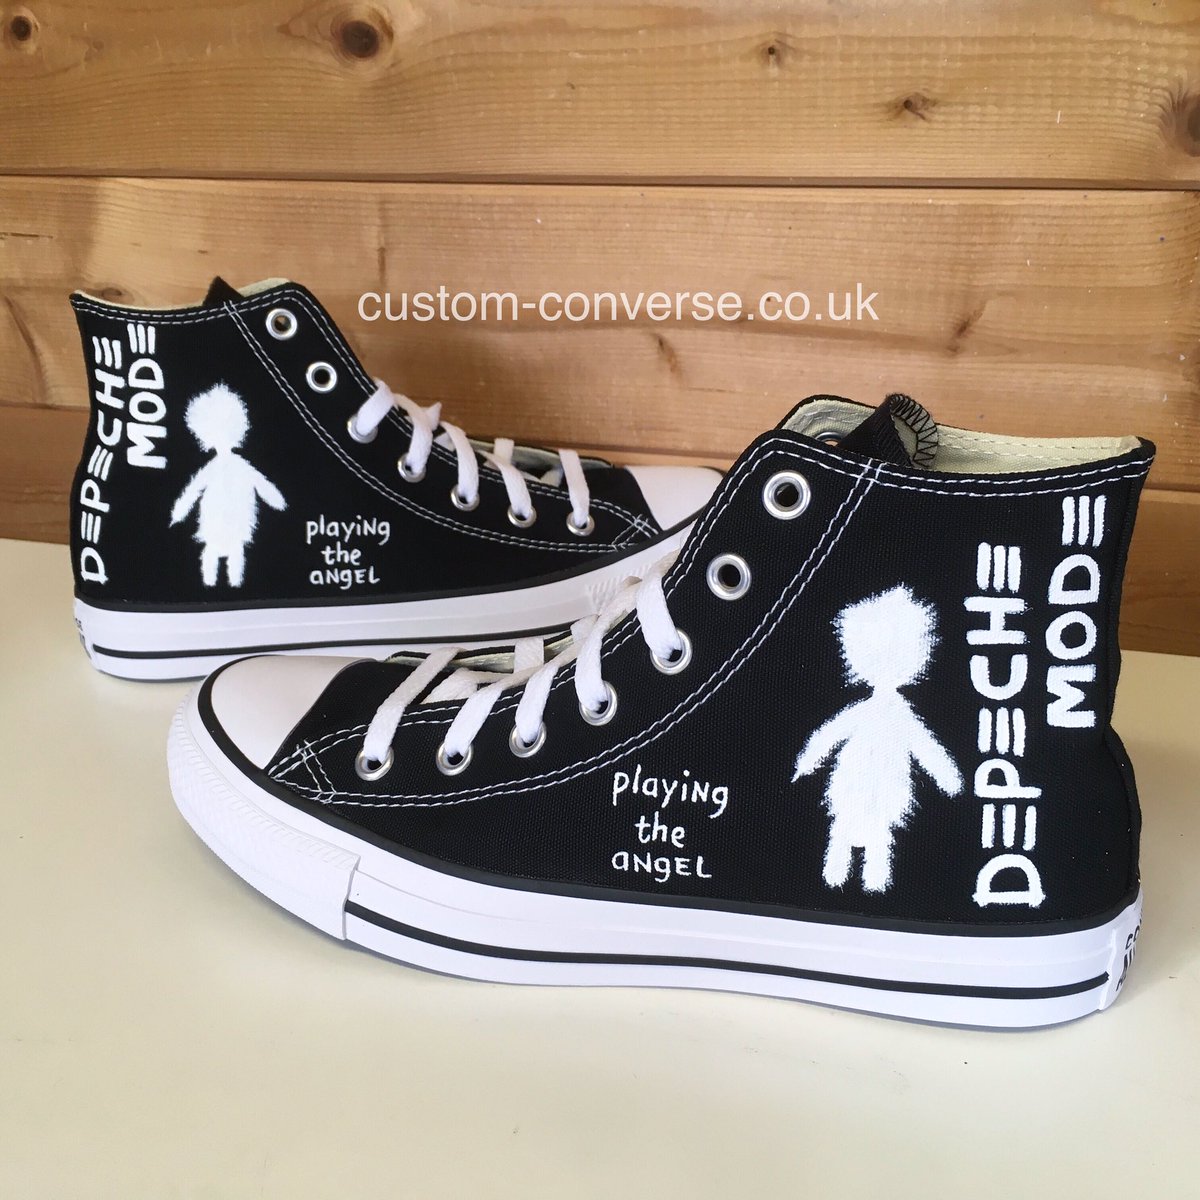 Custom Converse on Twitter: "Depeche Mode Playing the Angel classic black  high top Converse 🖤🤍 https://t.co/upOFaojwmA https://t.co/tAjoDwGtpC" /  Twitter